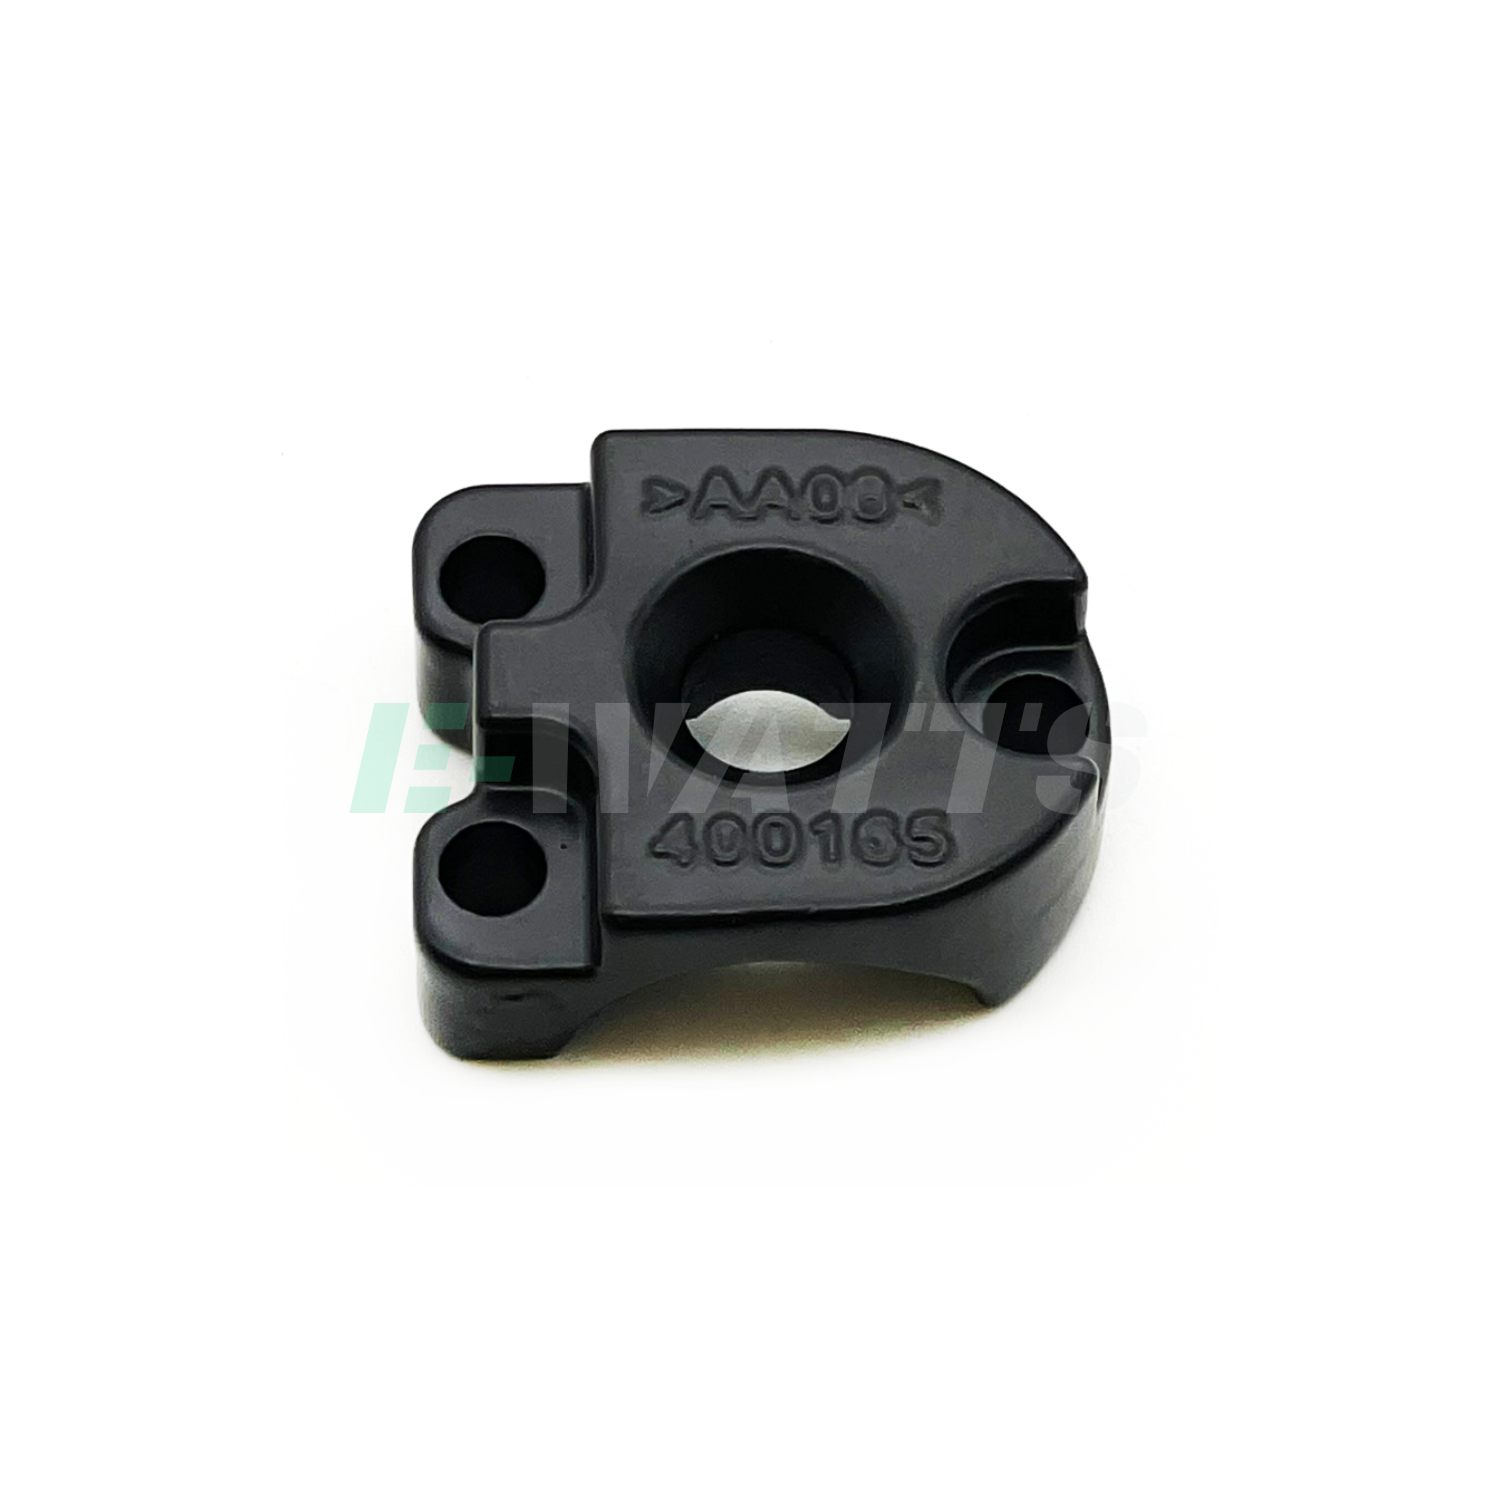 Support phare avant Xiaomi Scooter Pro 4